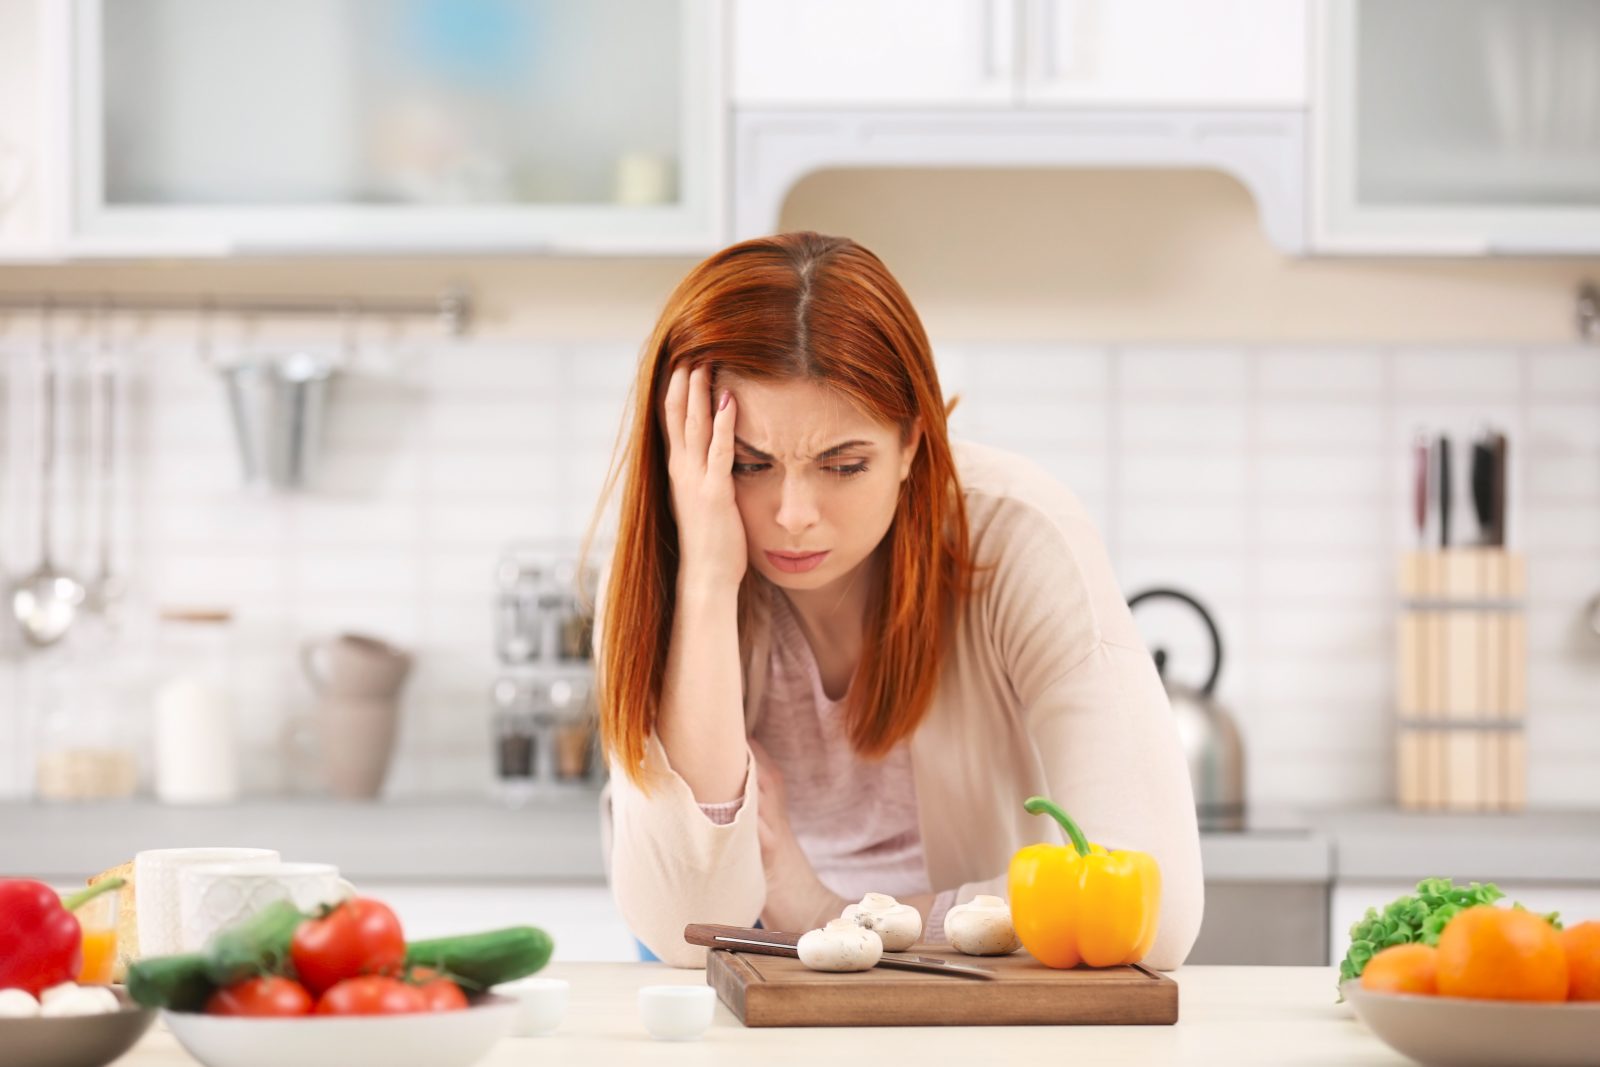 Tips to kick your kitchen fatigue